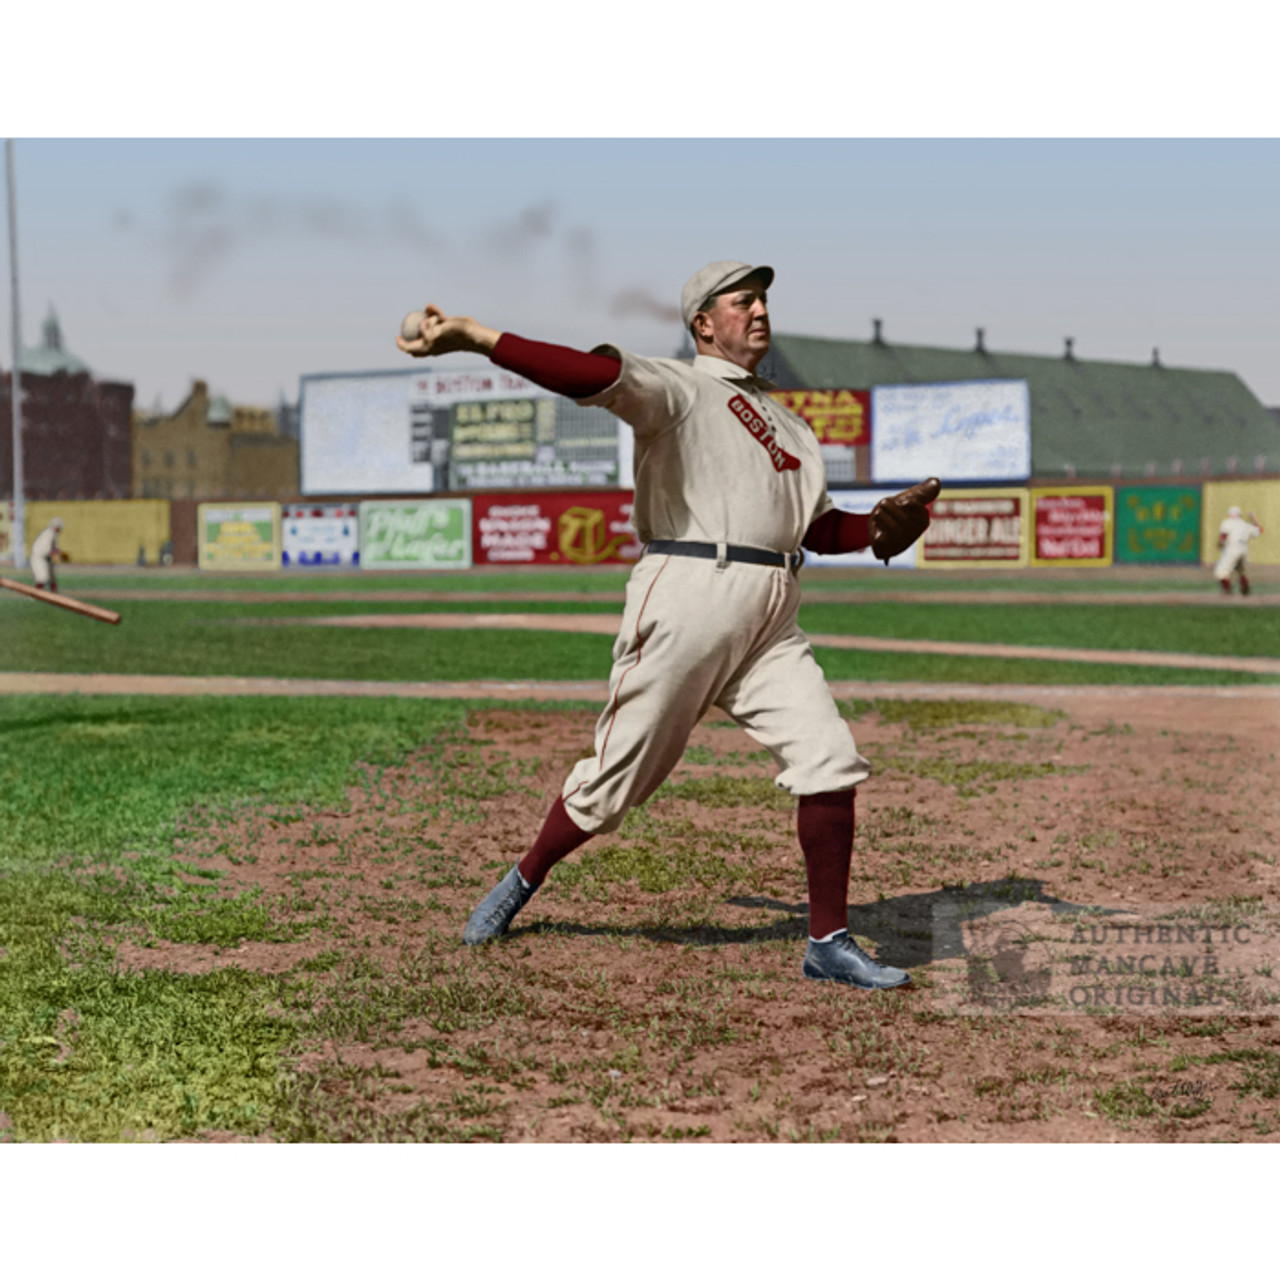 Babe Ruth (baseball legend) - 1920s - COLORIZED!!! 8x10*